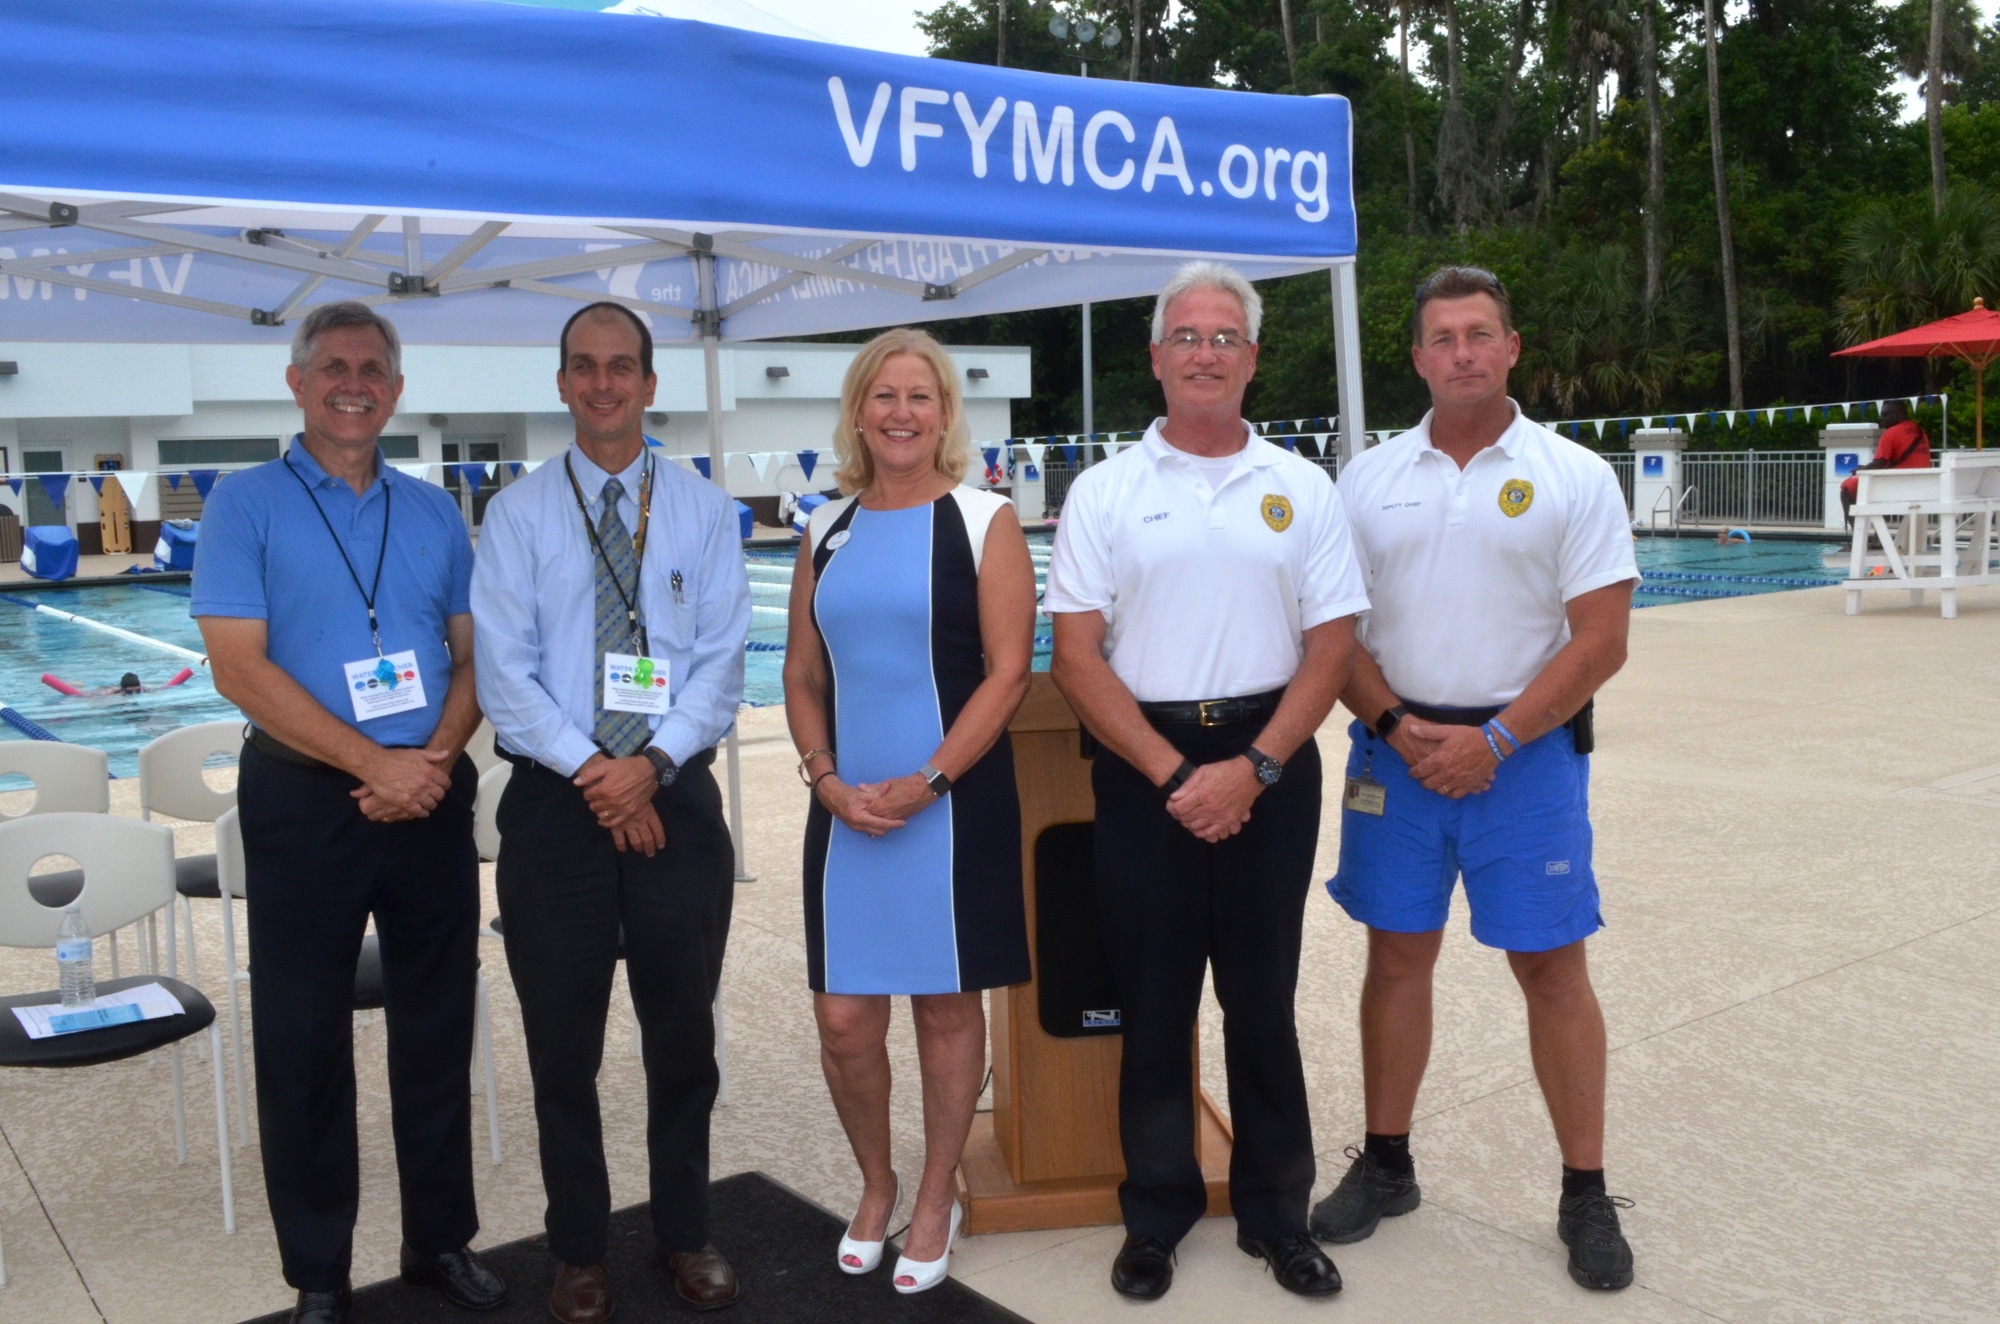 Shown are Steve Parris, Halifax Health; Eric Maday, Florida Dept. of Health; Teresa Rand, YMCA president and CEO; Mark Swanson, director of Beach Services; and Deputy Chief Ray Manchester, Beach Patrol.